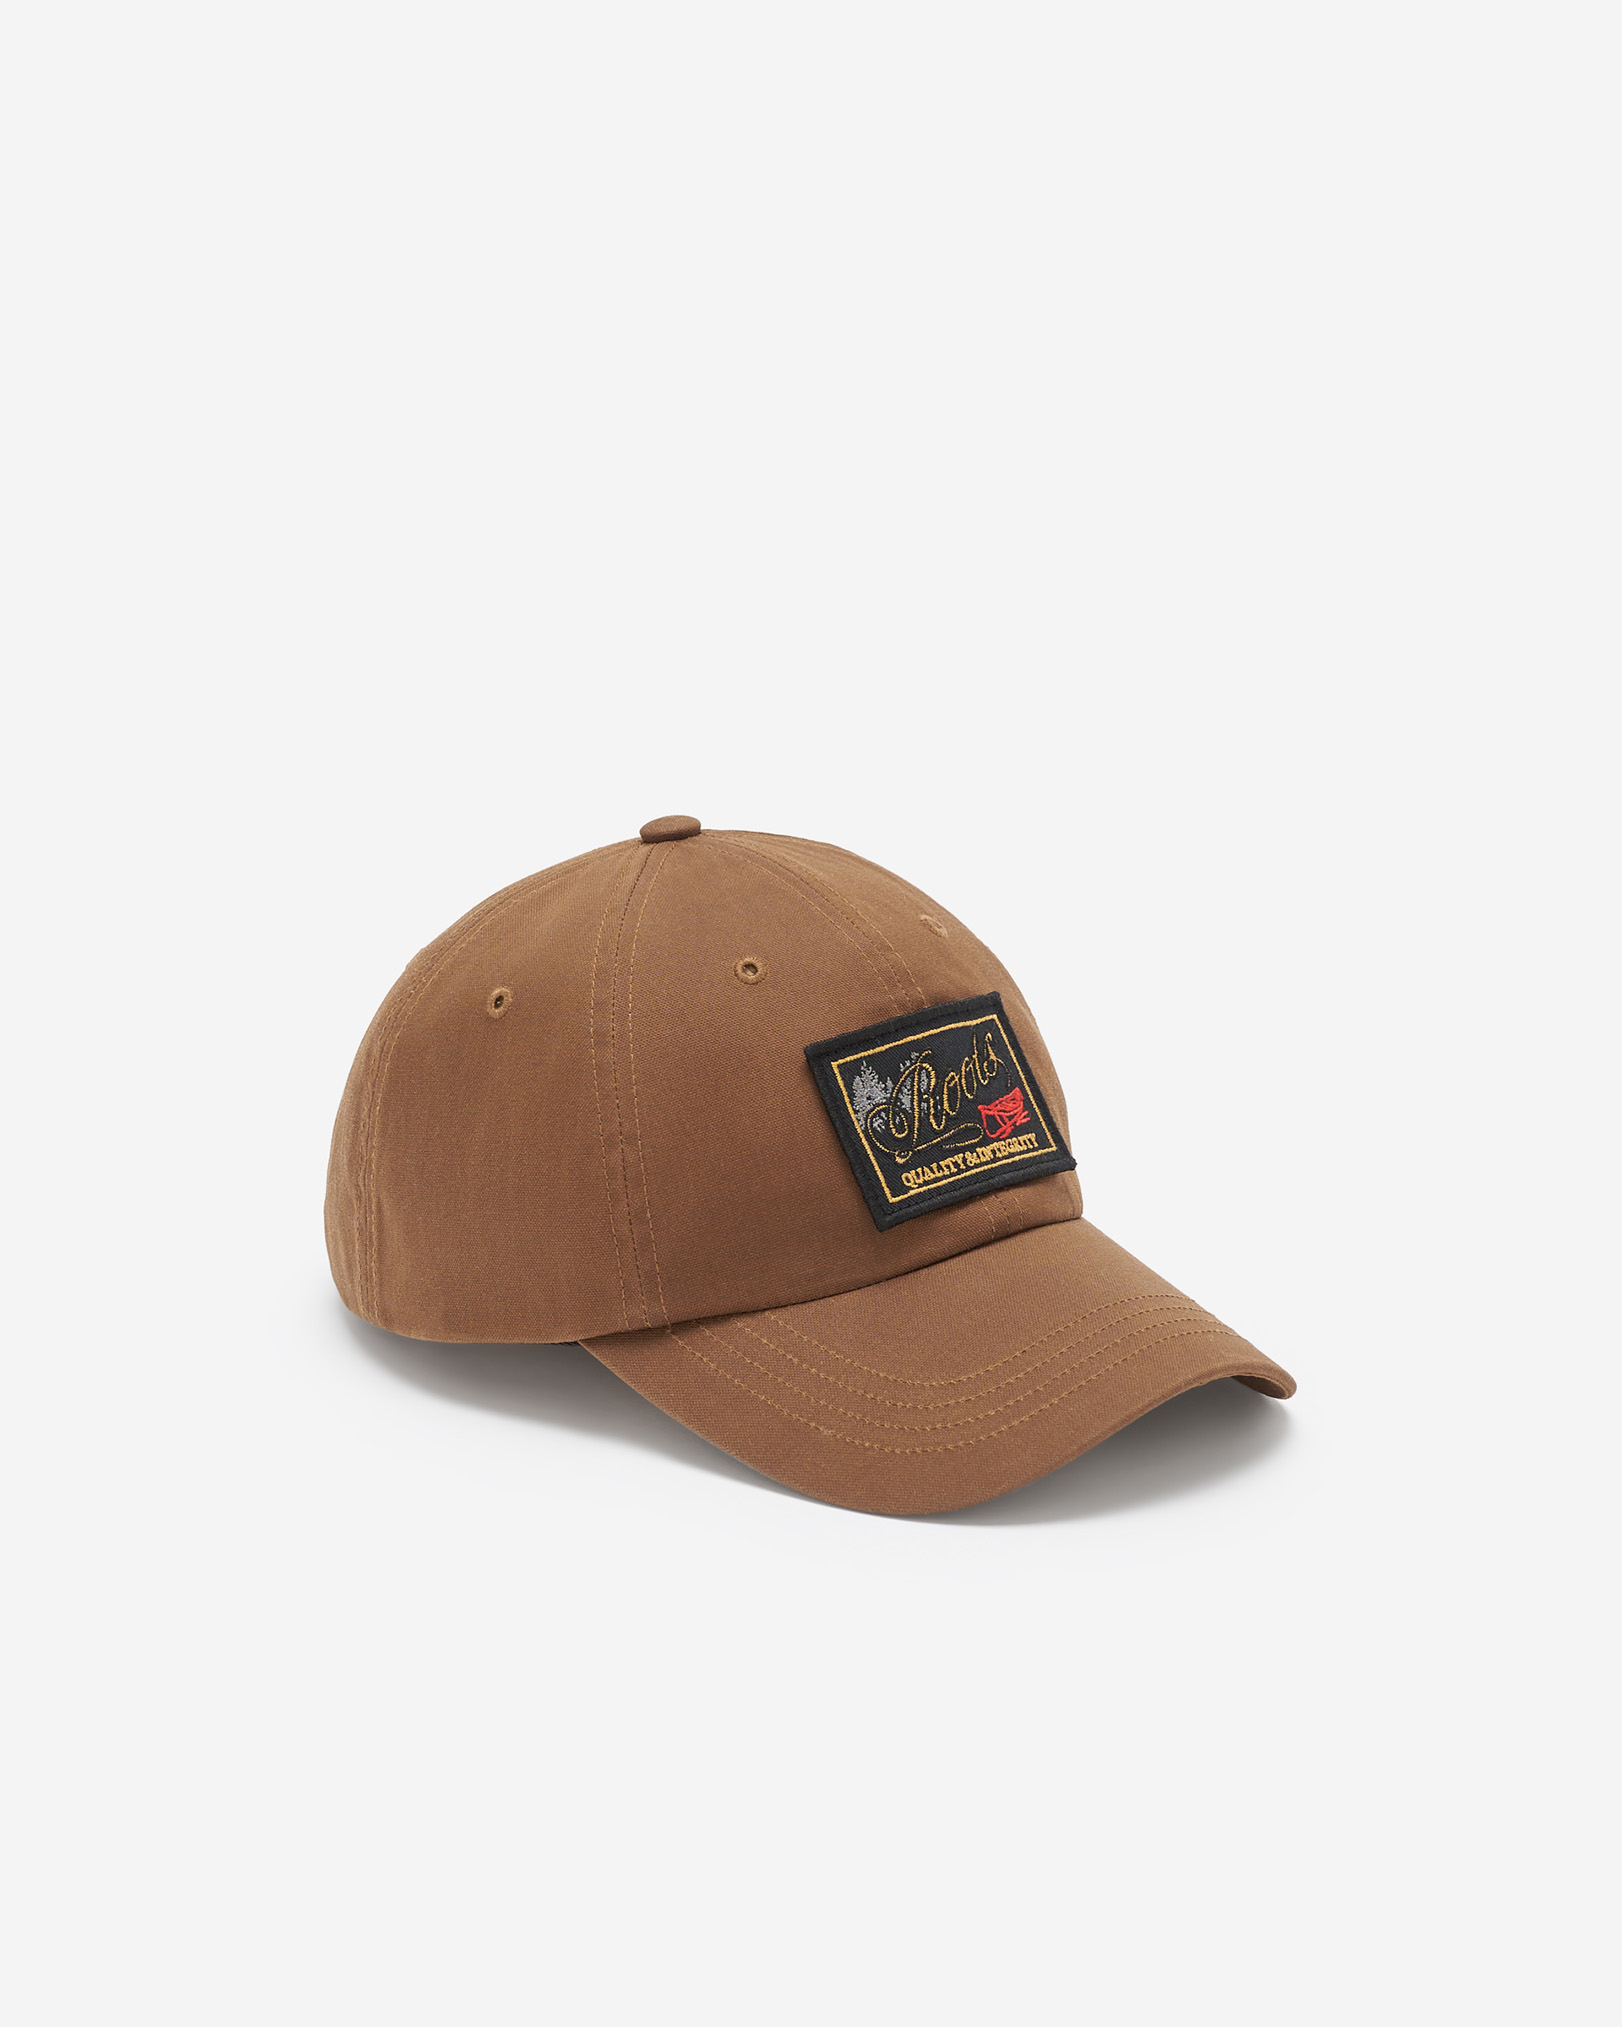 Roots Waxed Cotton Baseball Cap Hat in Harvest Brown